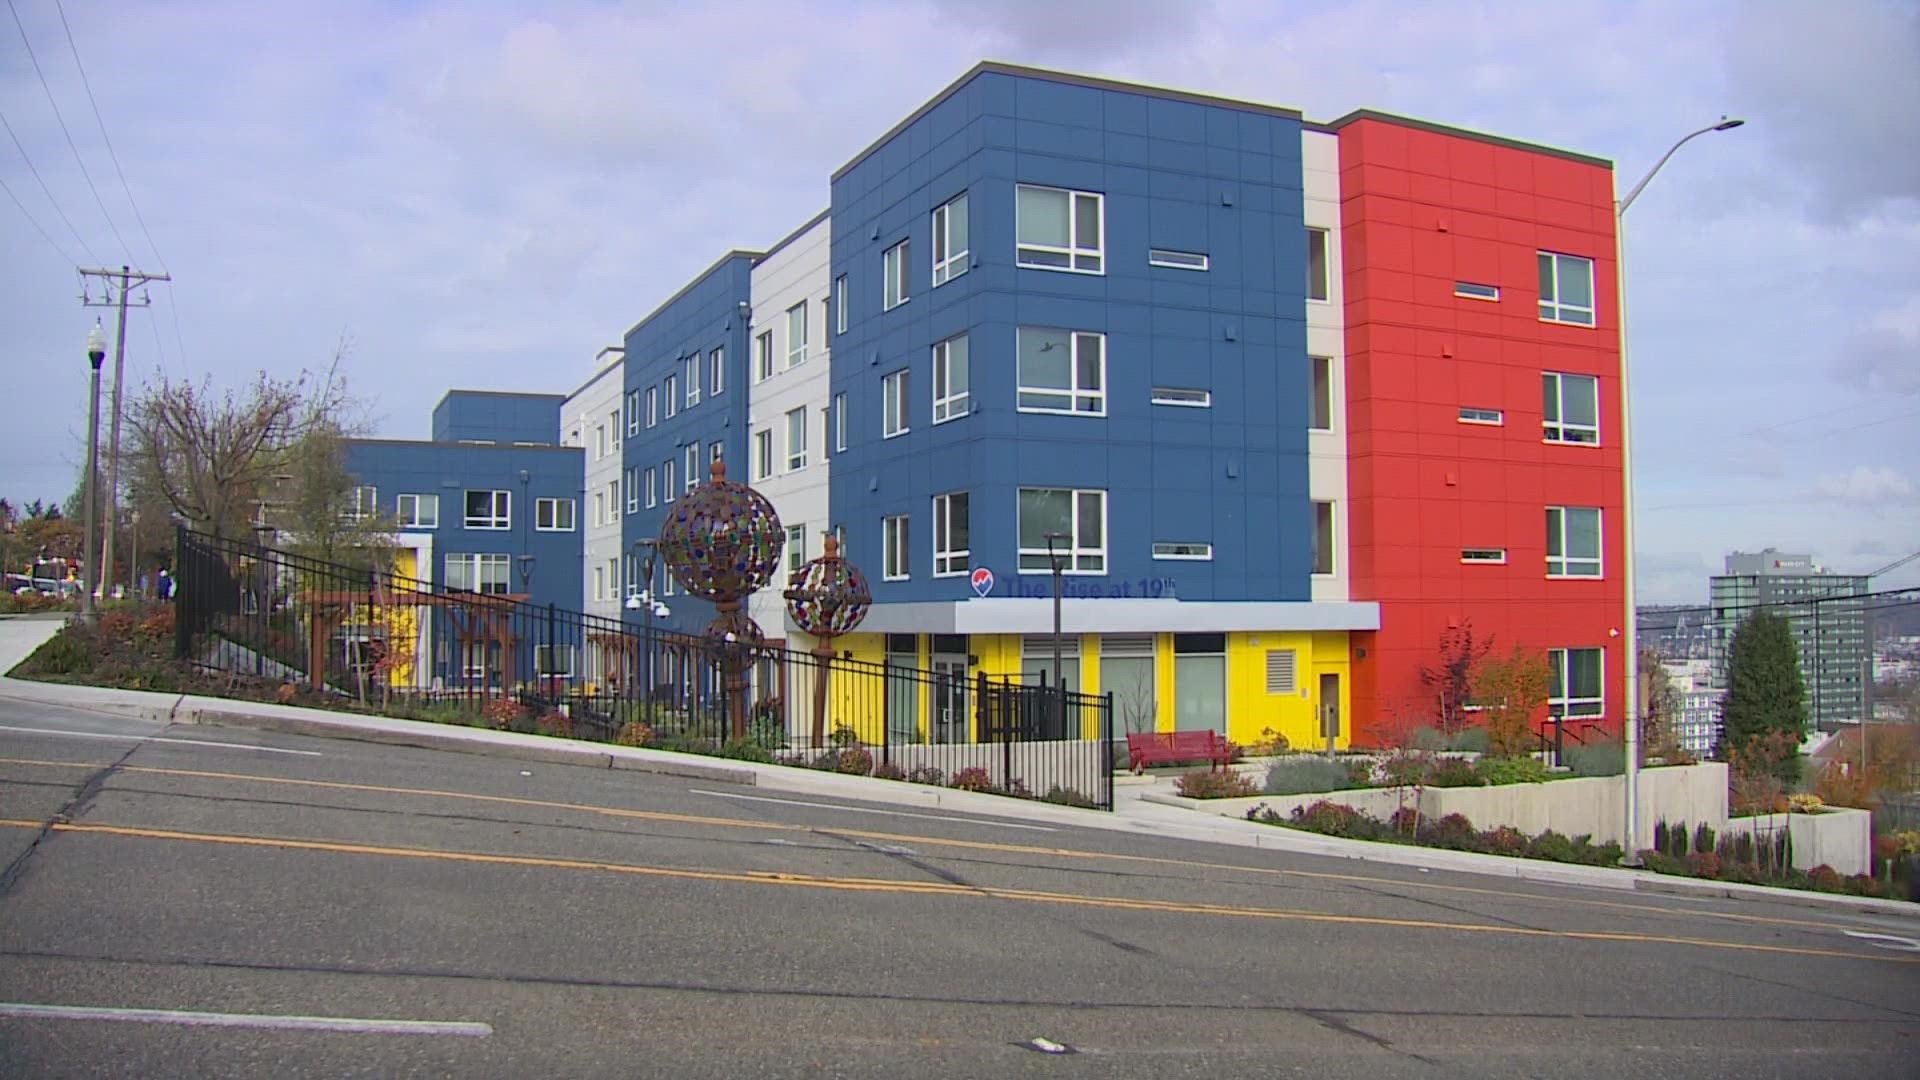 tacoma-opens-waitlist-for-low-income-housing-after-two-years-king5